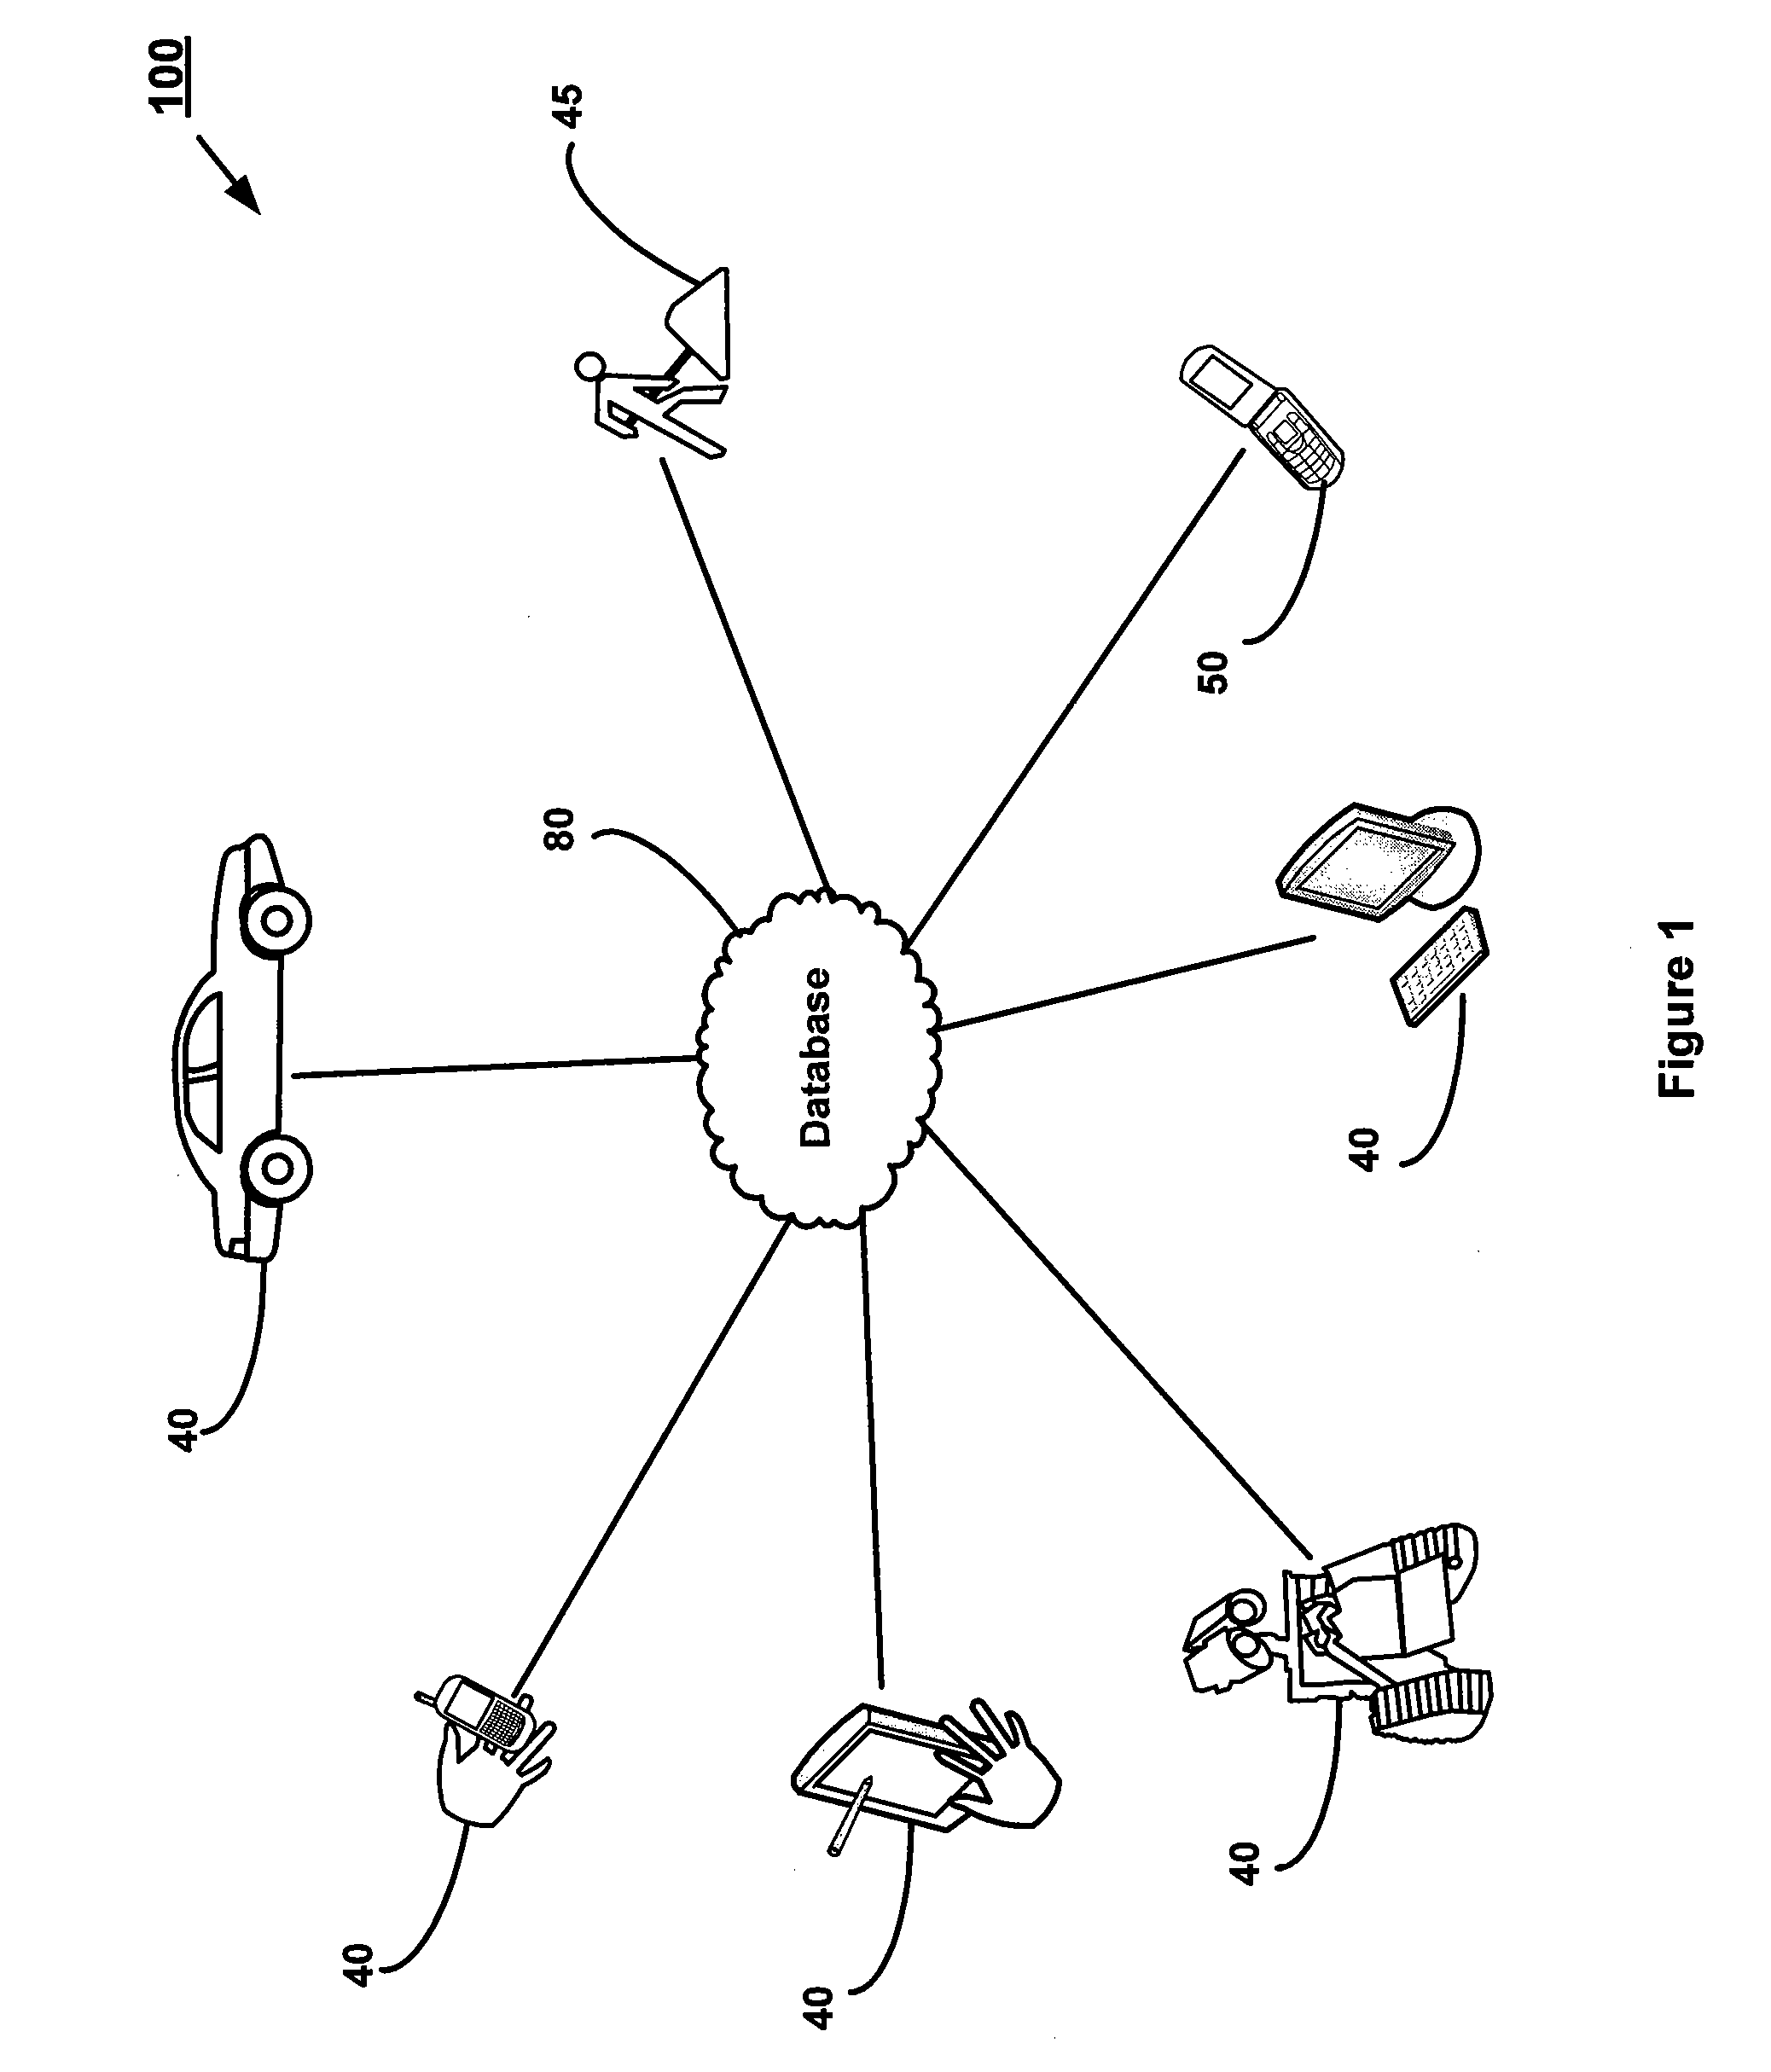 System and method for hazard detection and sharing